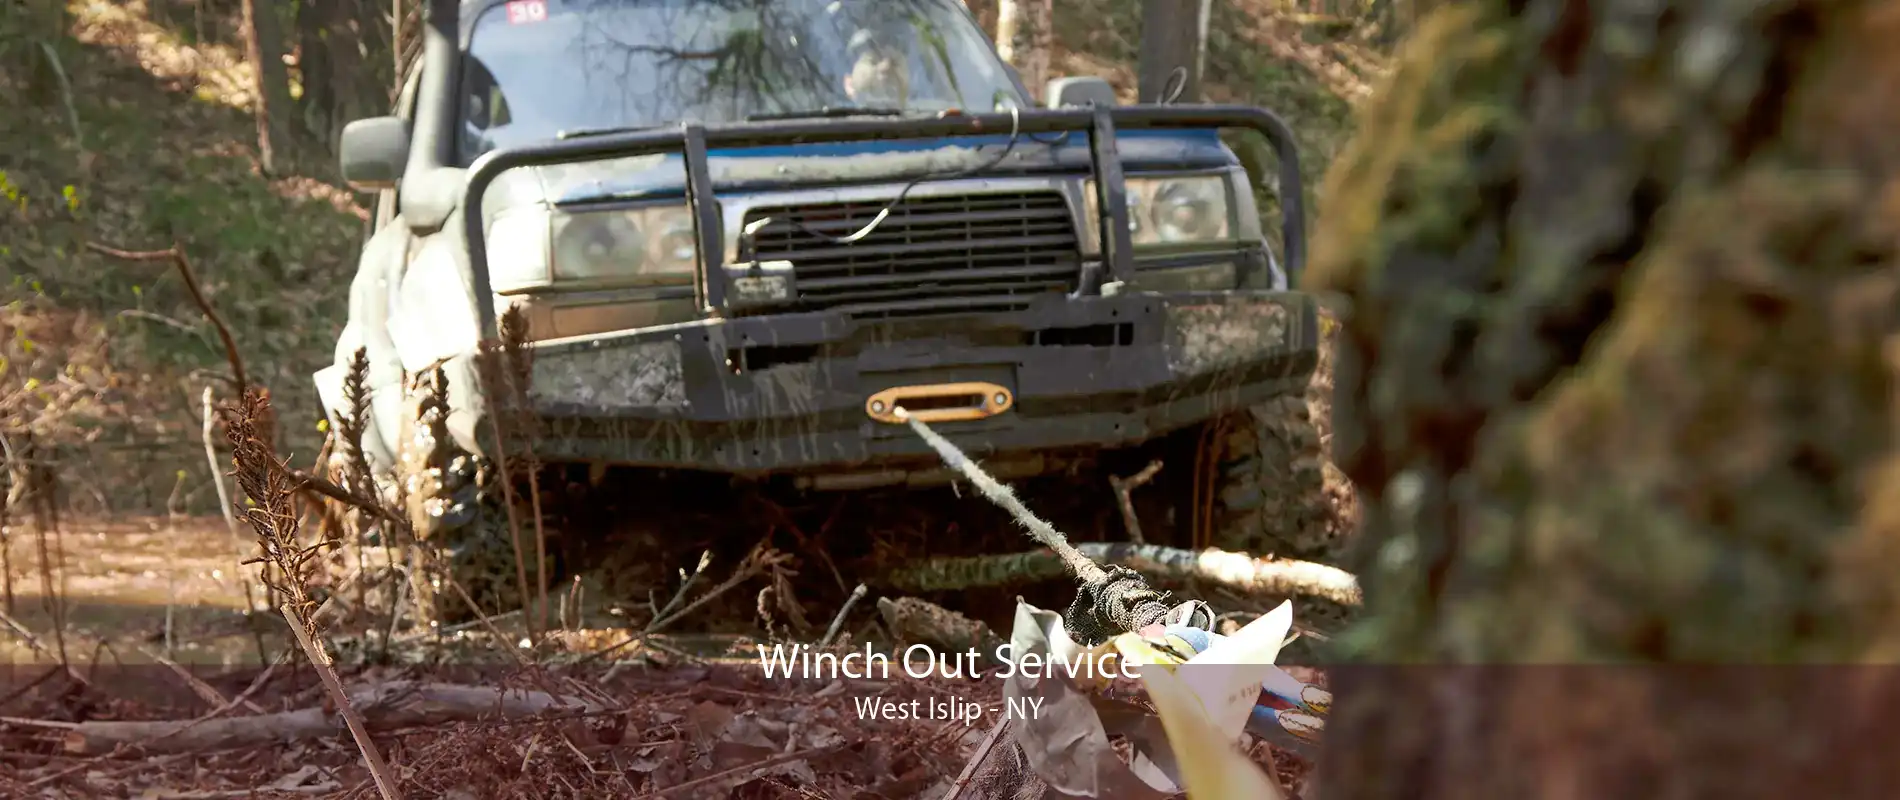 Winch Out Service West Islip - NY